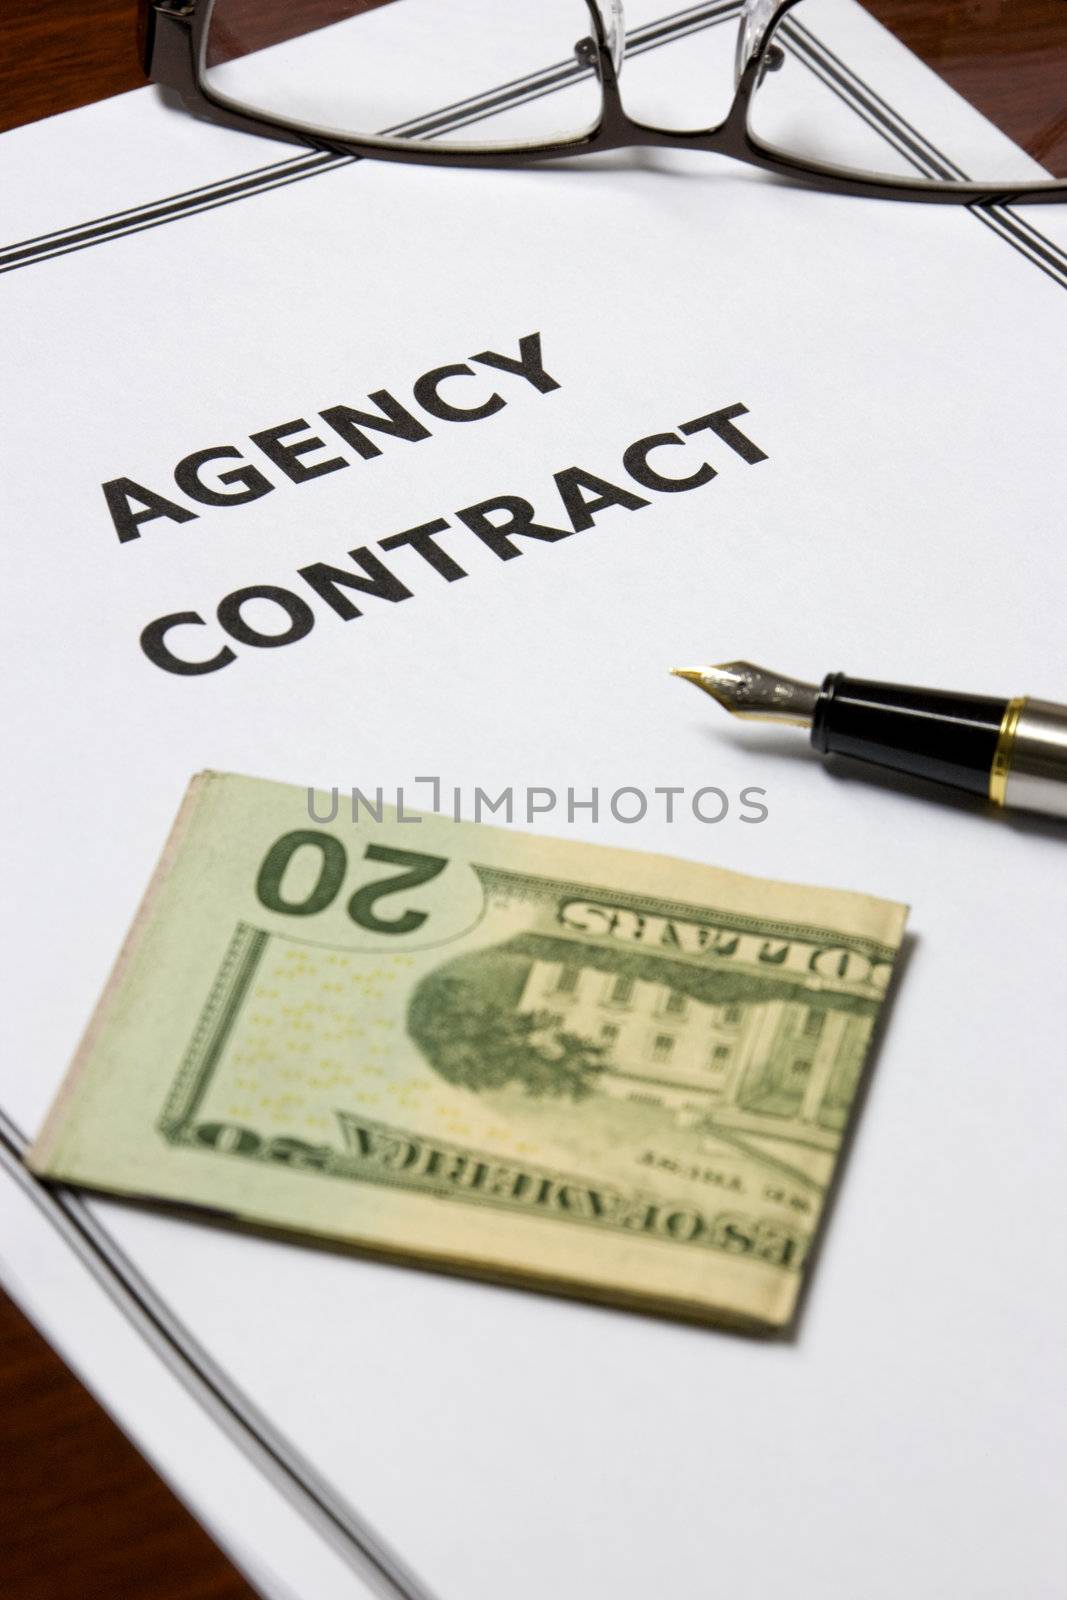 Agency Contract by shariffc